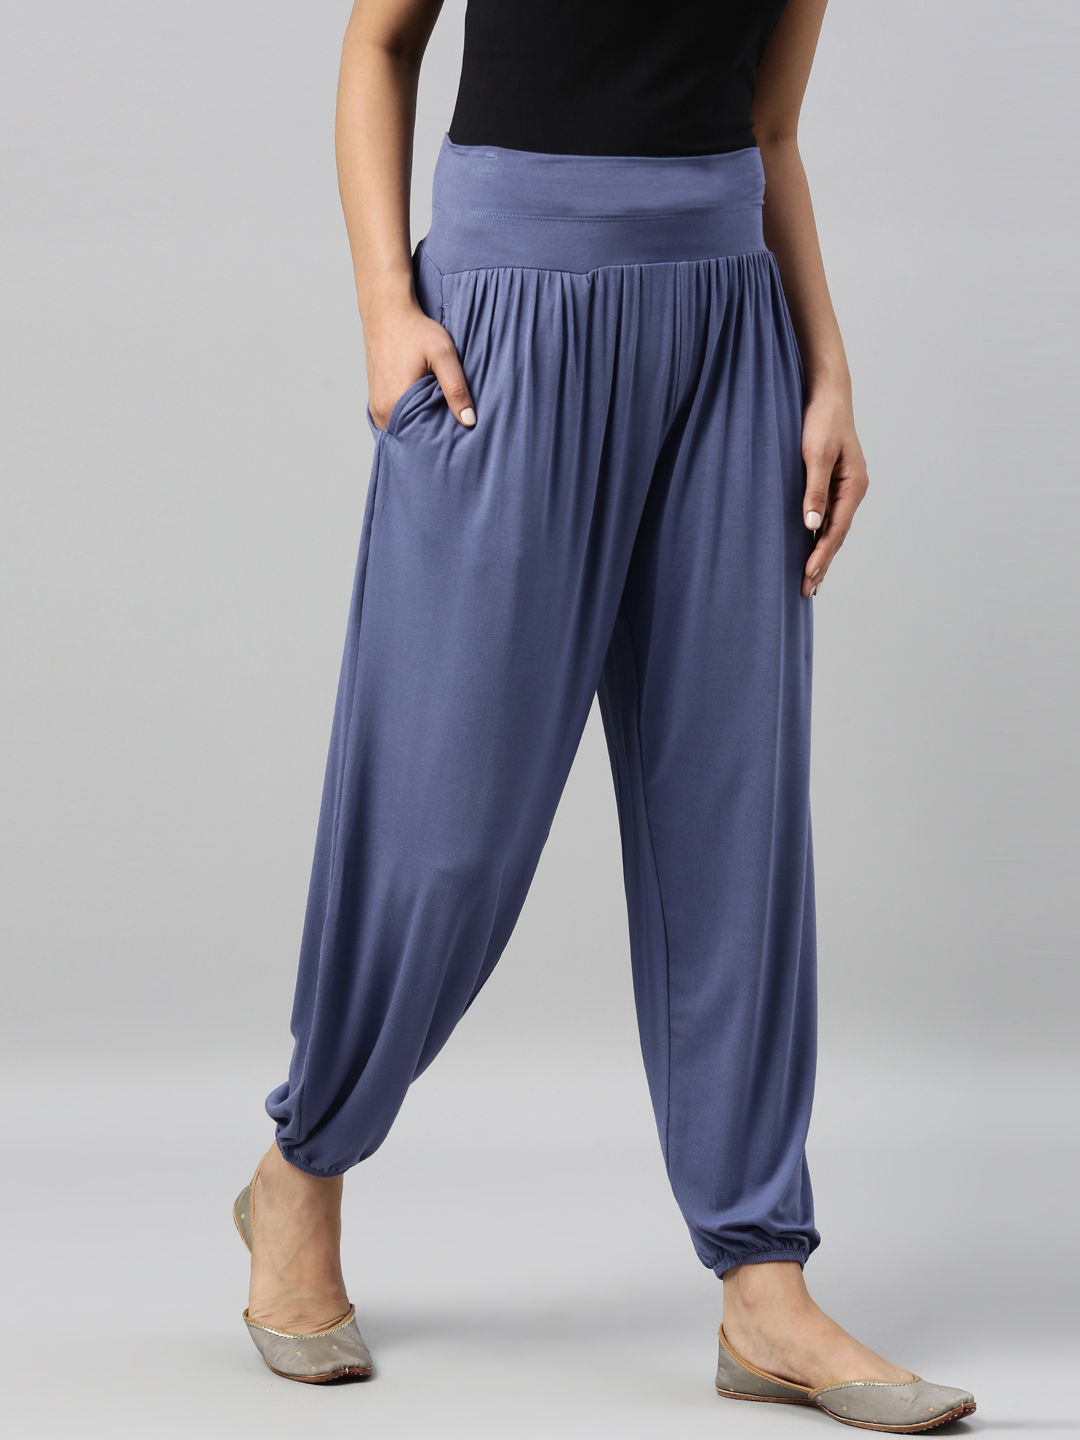 Quirky Harem Pant - InWeave